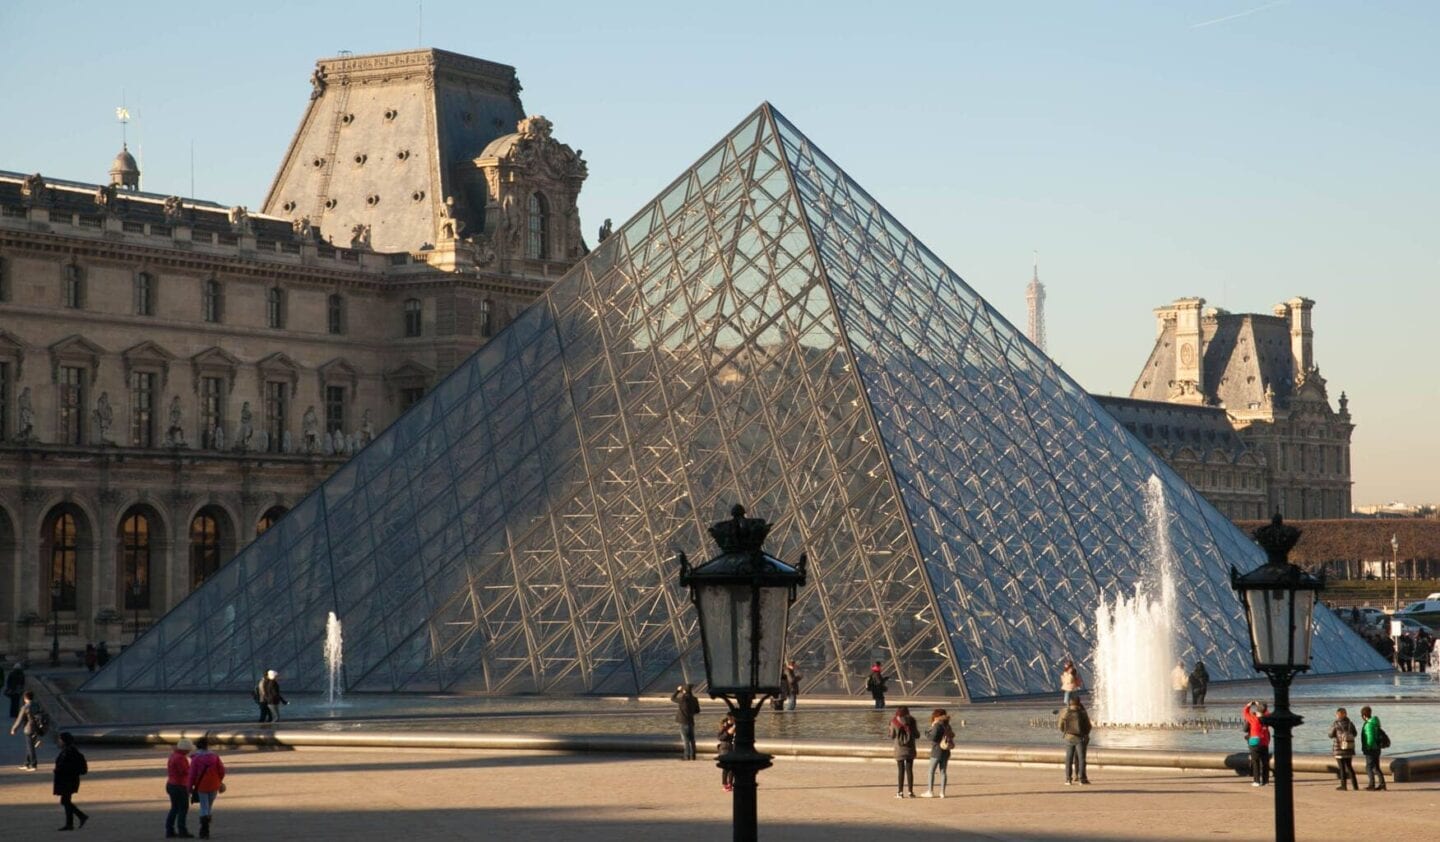 One Hour in the Louvre, Paris - Is it Worth it? www.minitravellers.co.uk